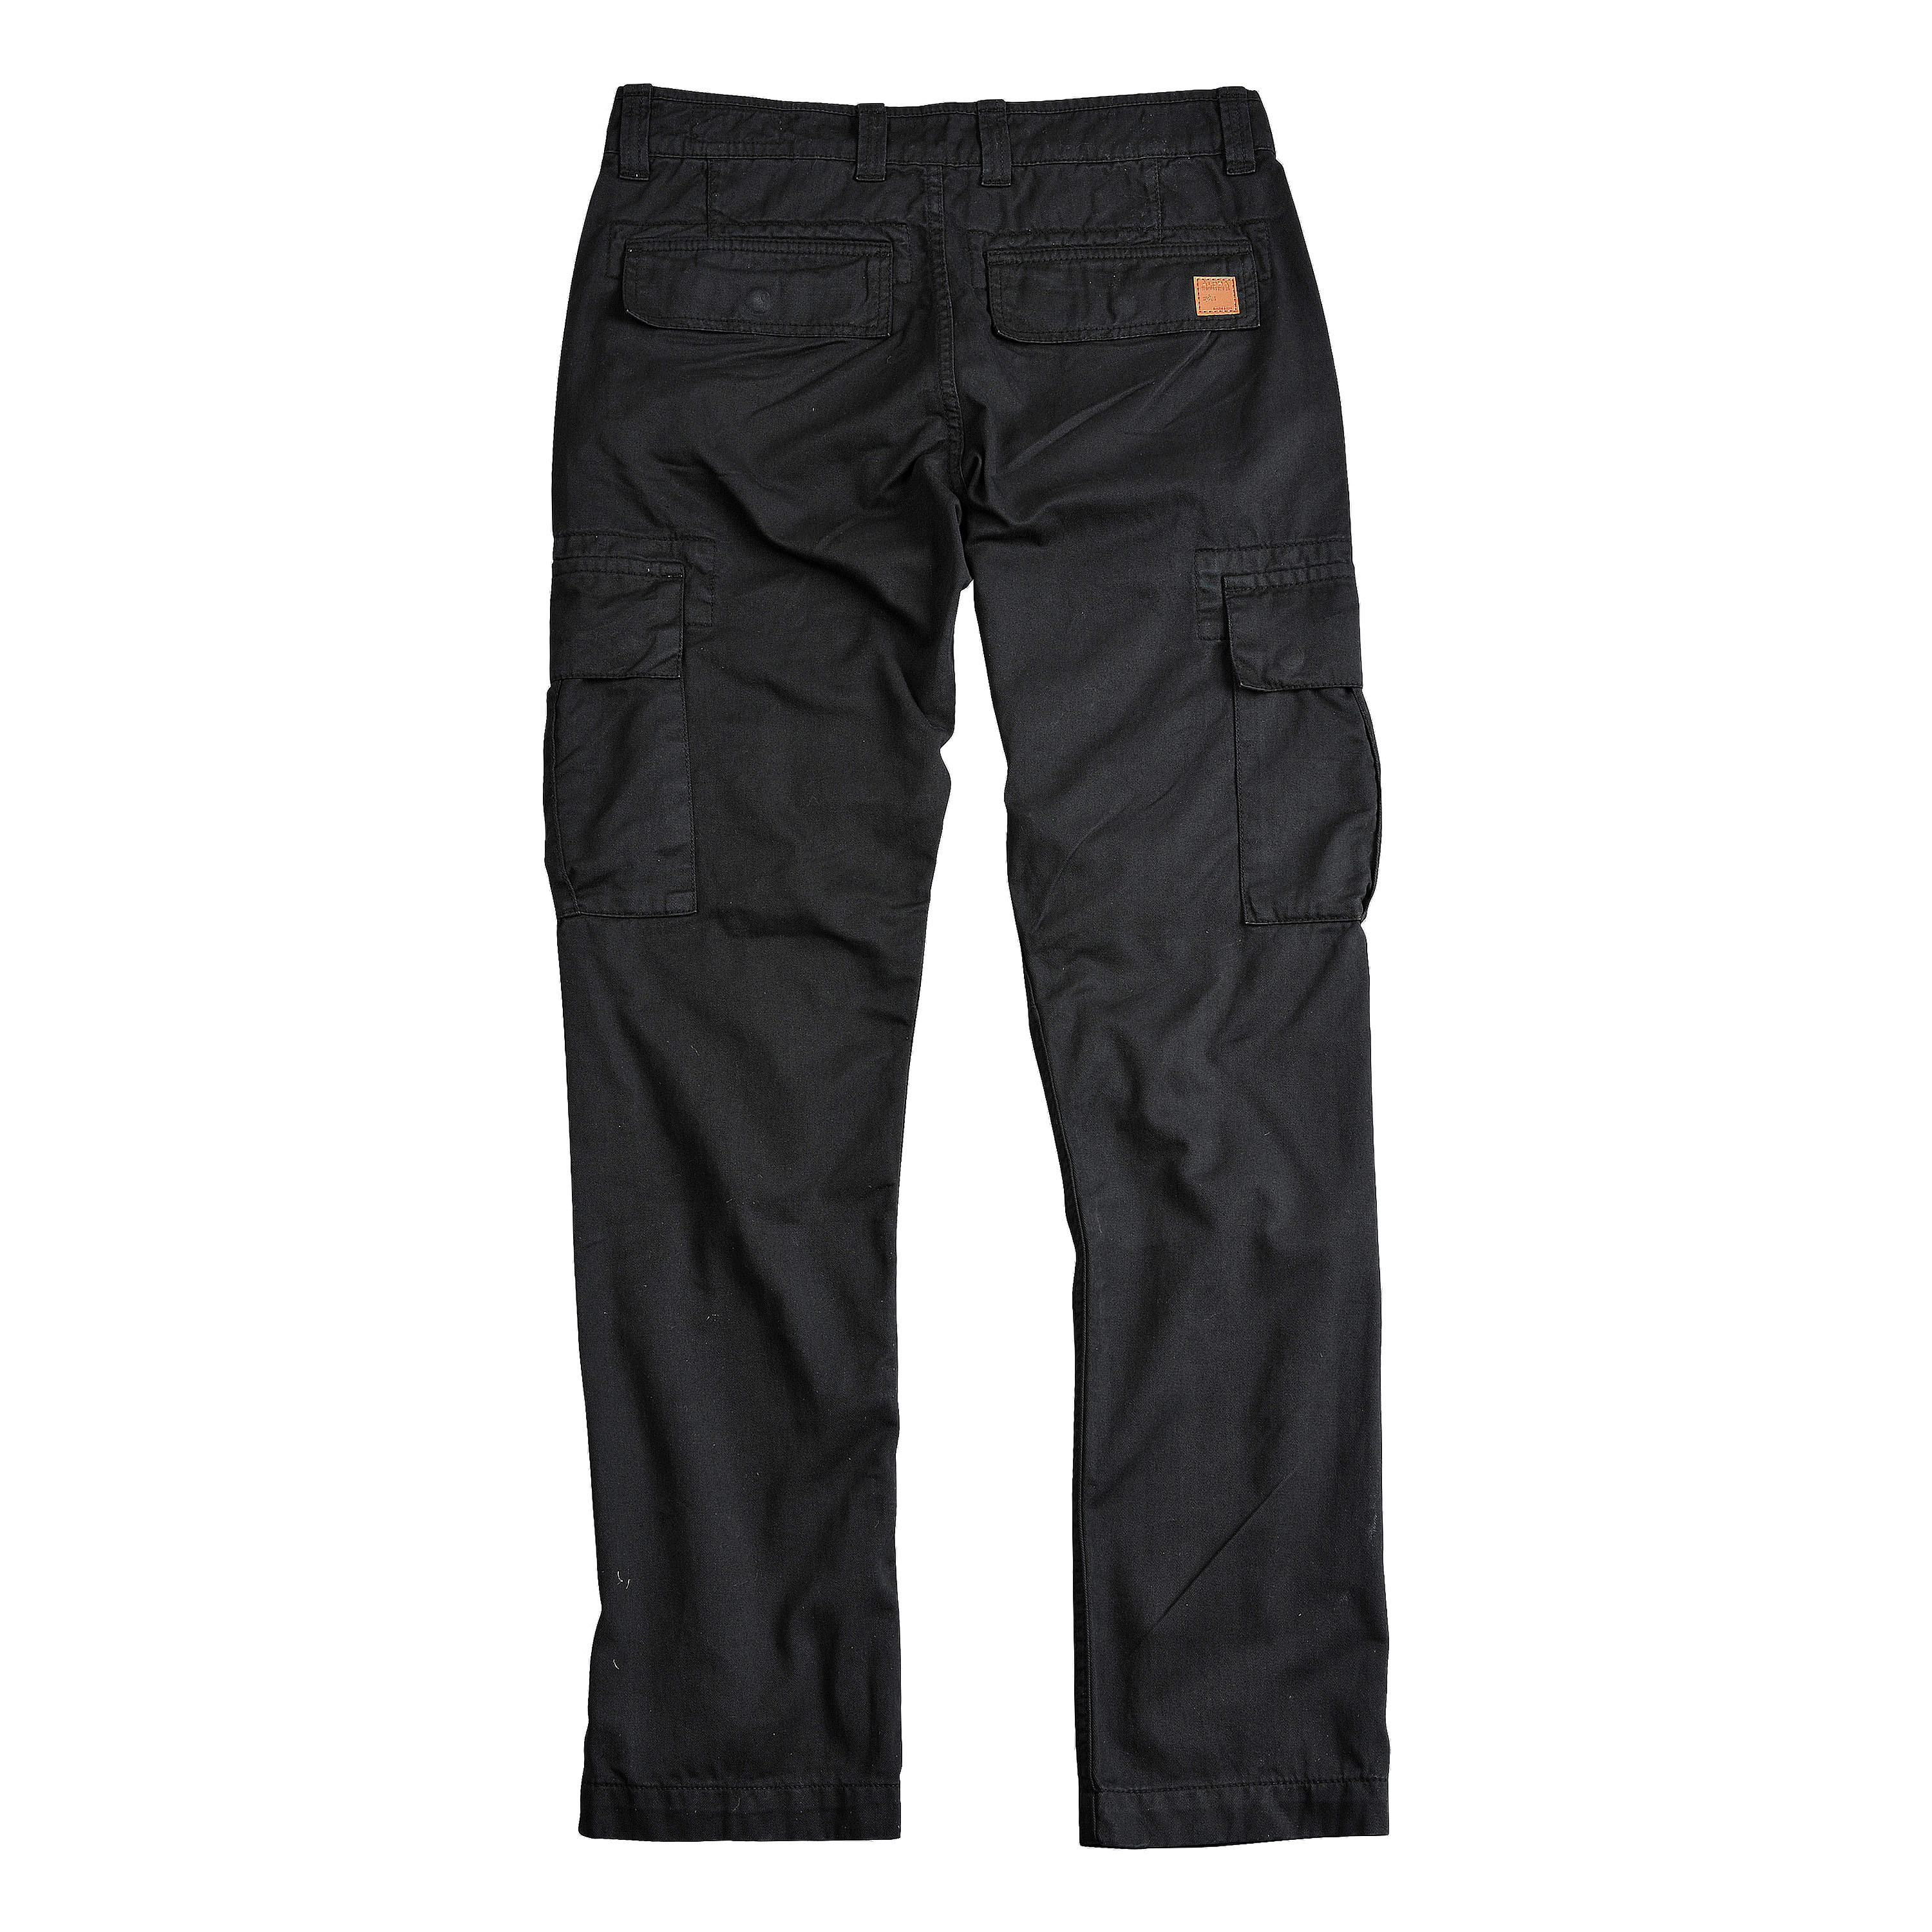 the Industries Pants Alpha Agent Purchase black by ASMC